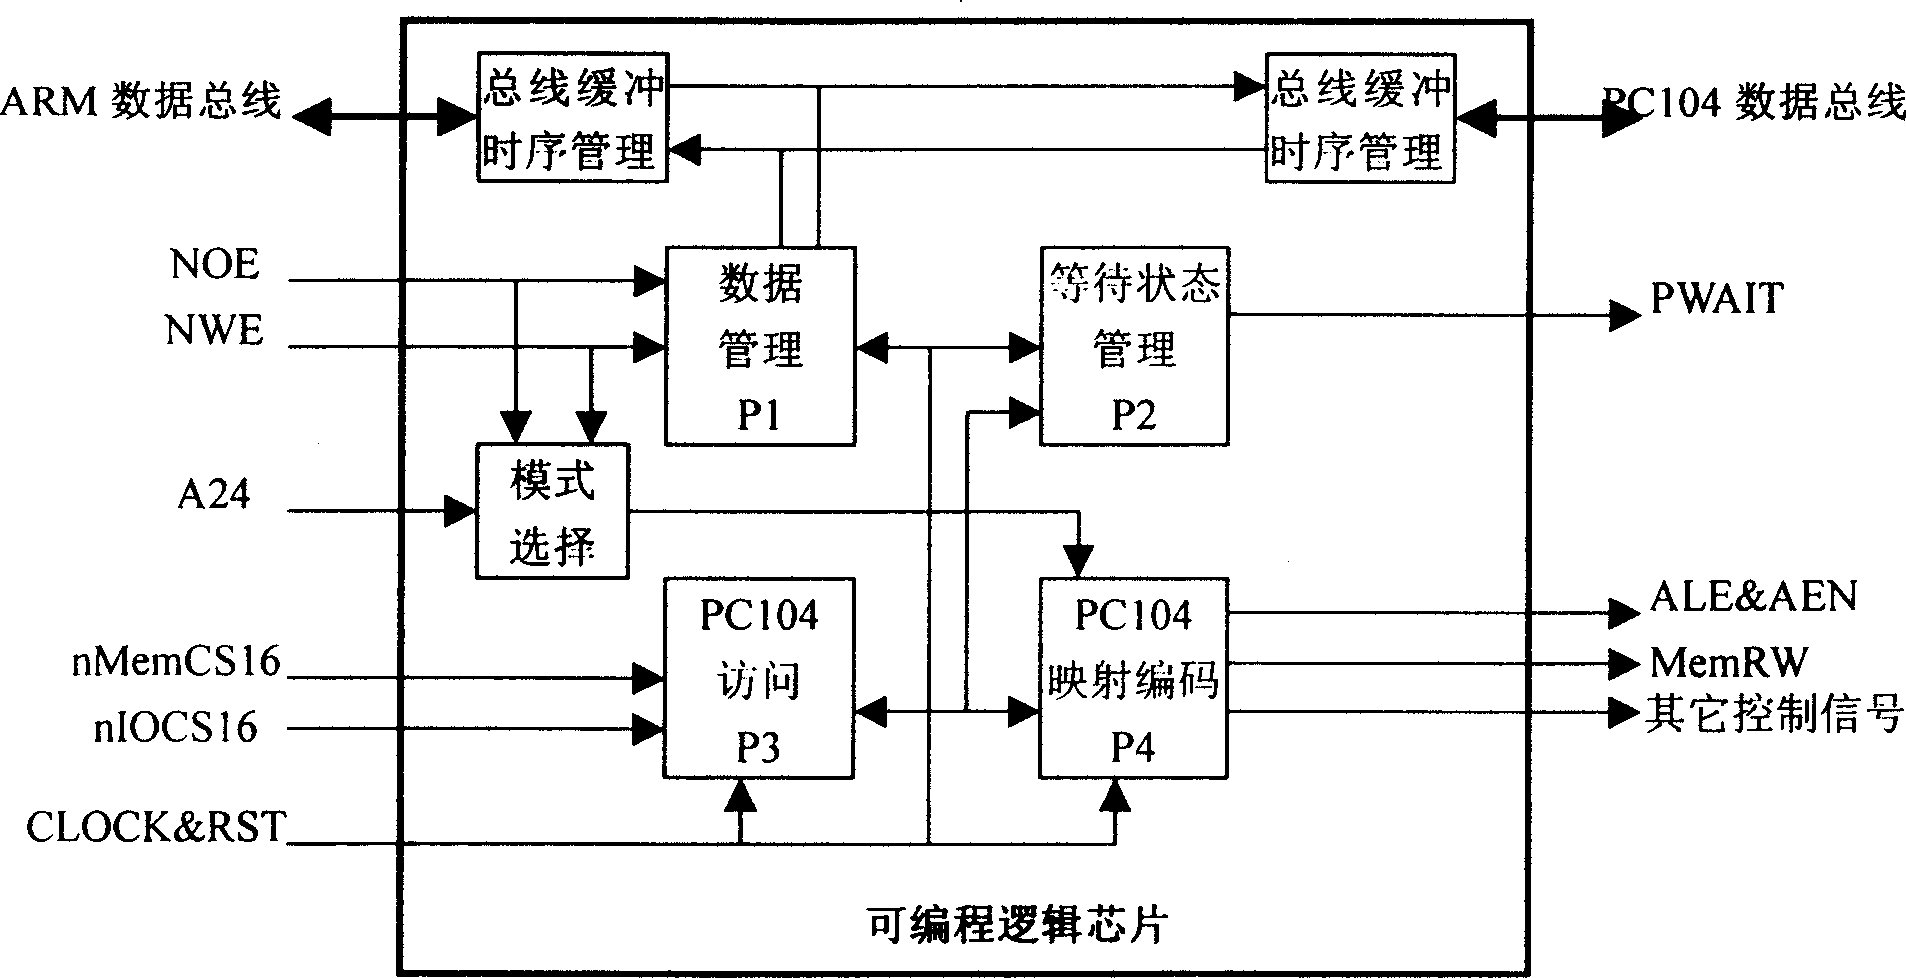 PC104 embedded type computer based on ARM